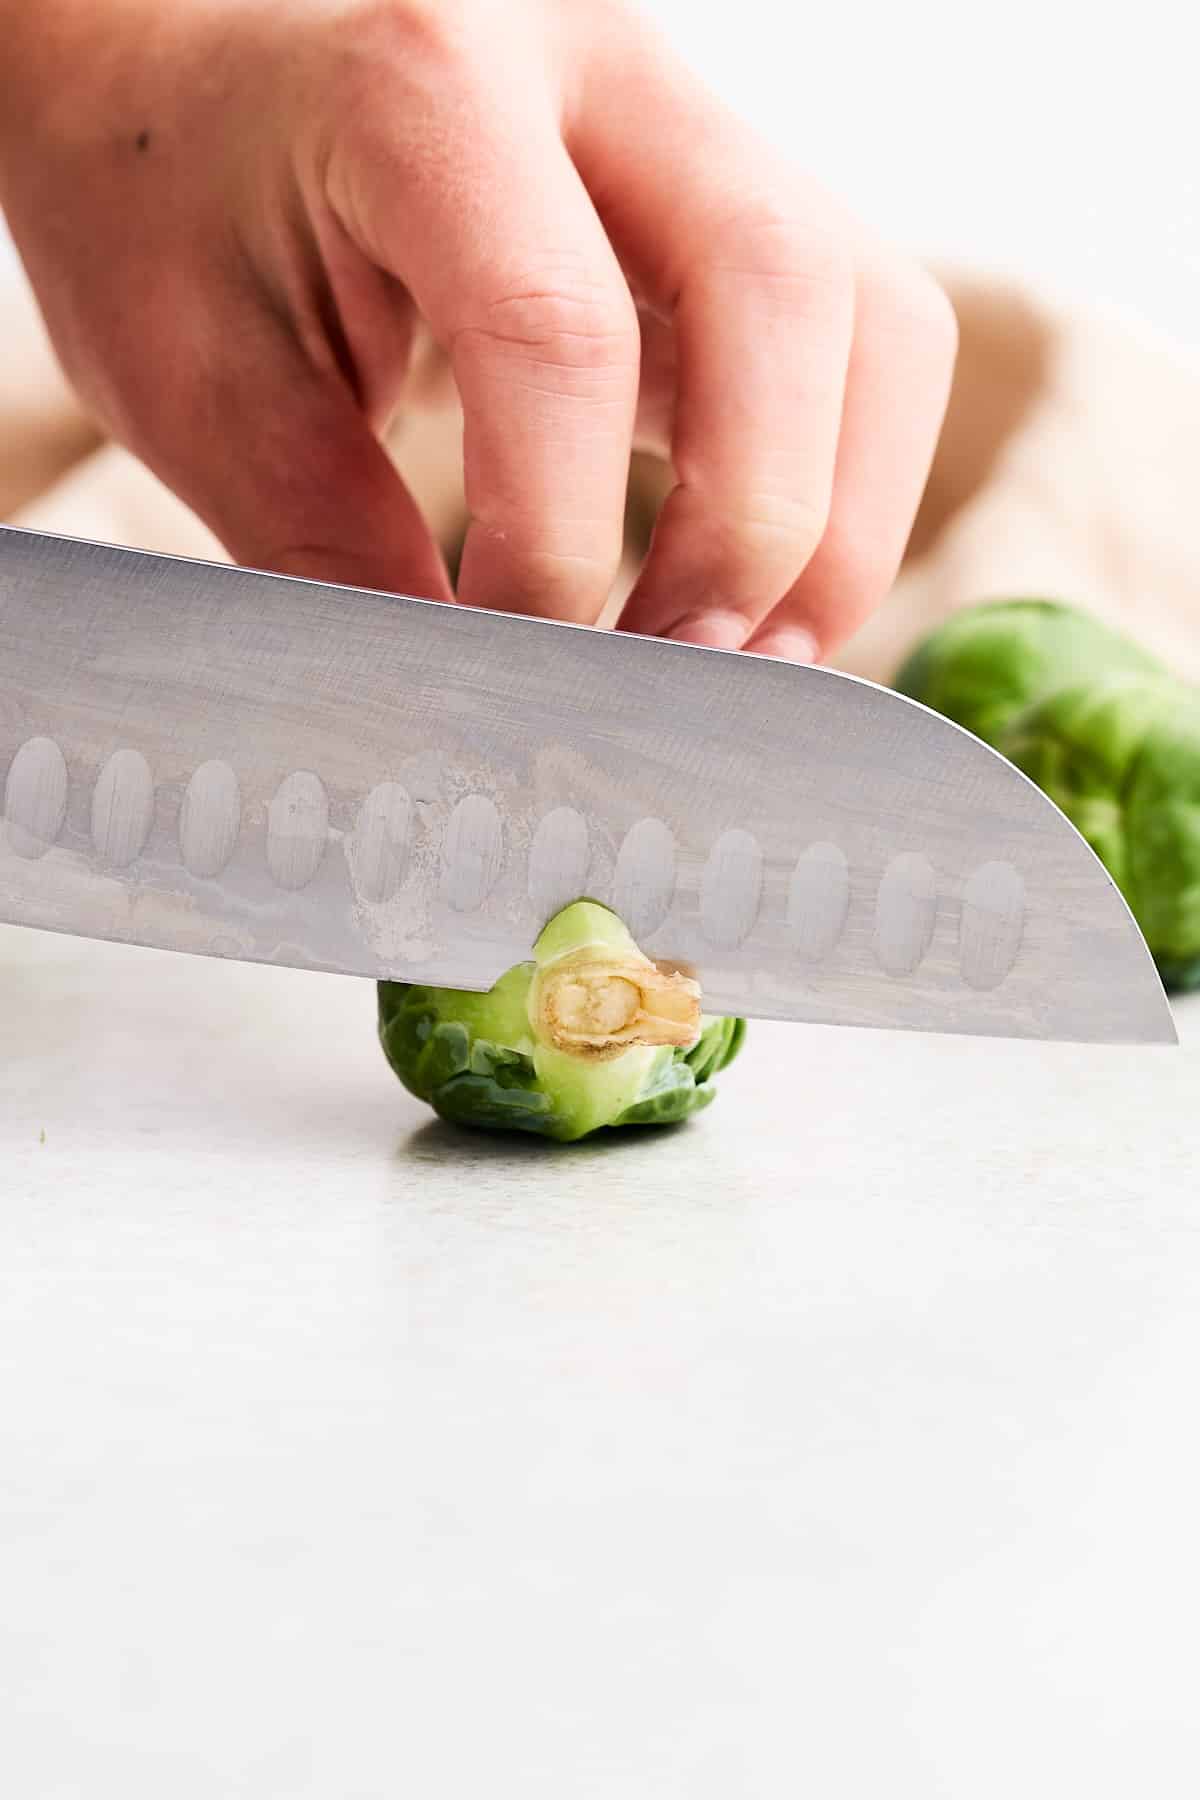 Chopping the end off of a Brussels sprout.